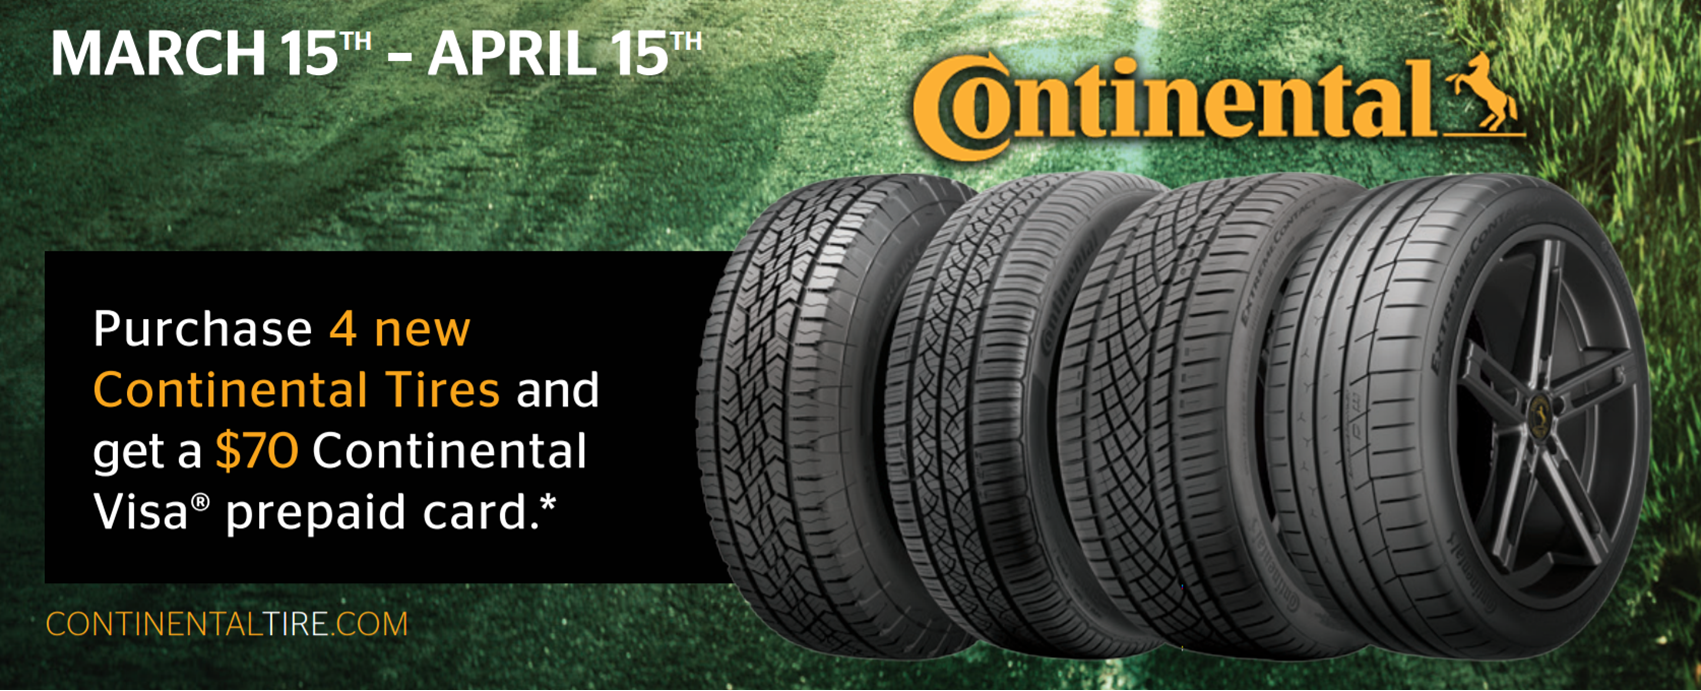 Mail In Rebate Continental Tires